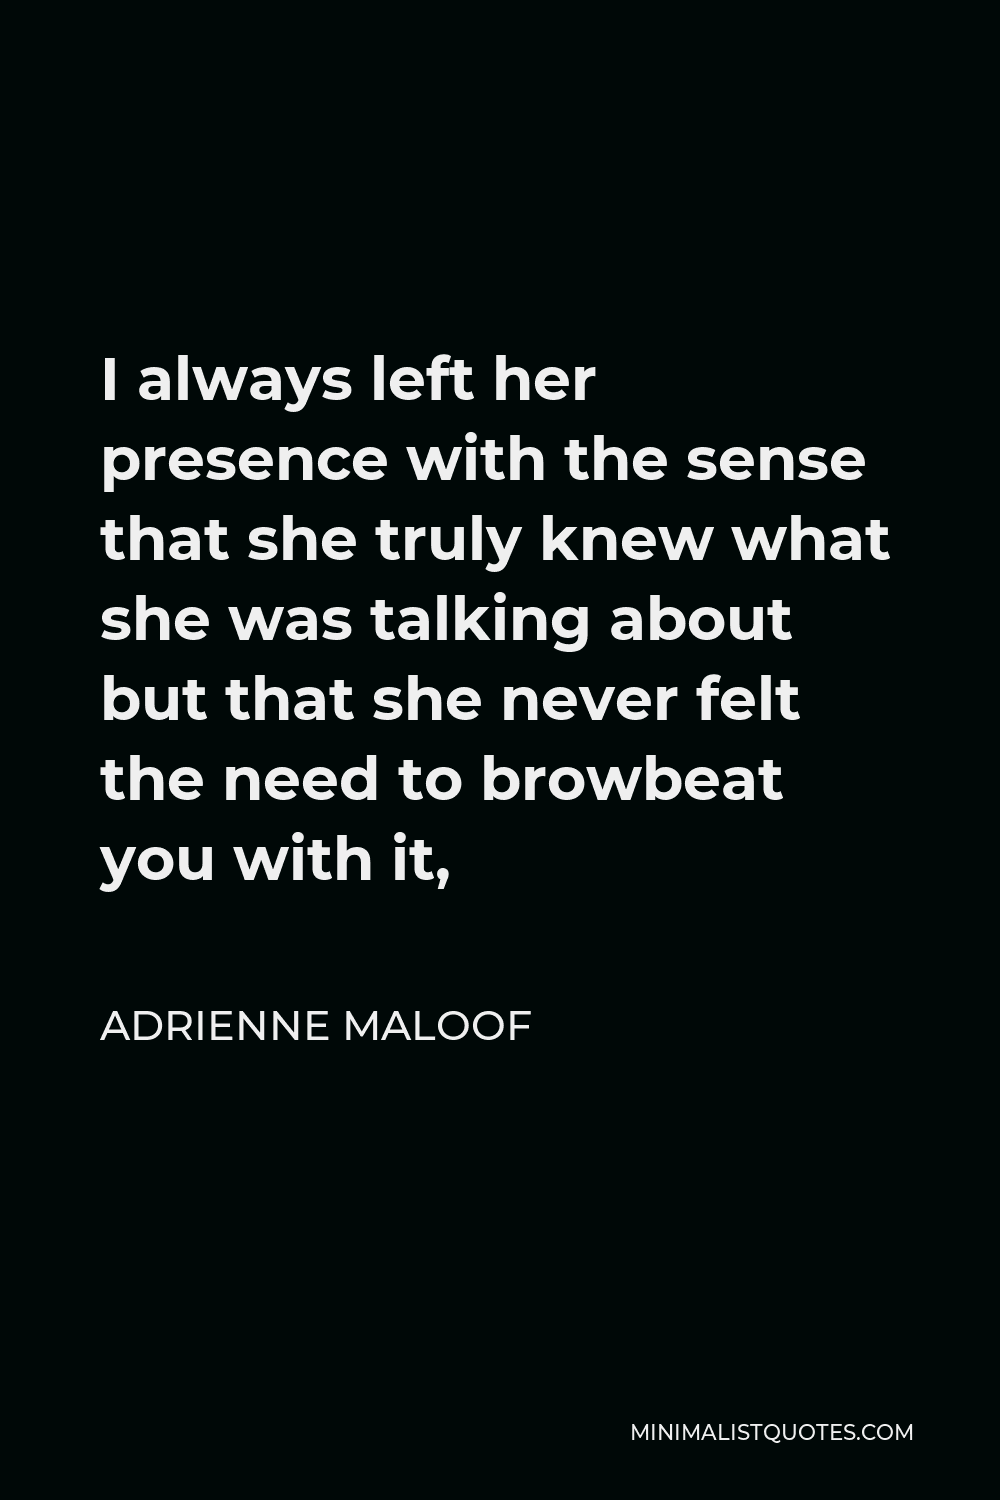 Adrienne Maloof Quote - I always left her presence with the sense that she truly knew what she was talking about but that she never felt the need to browbeat you with it,